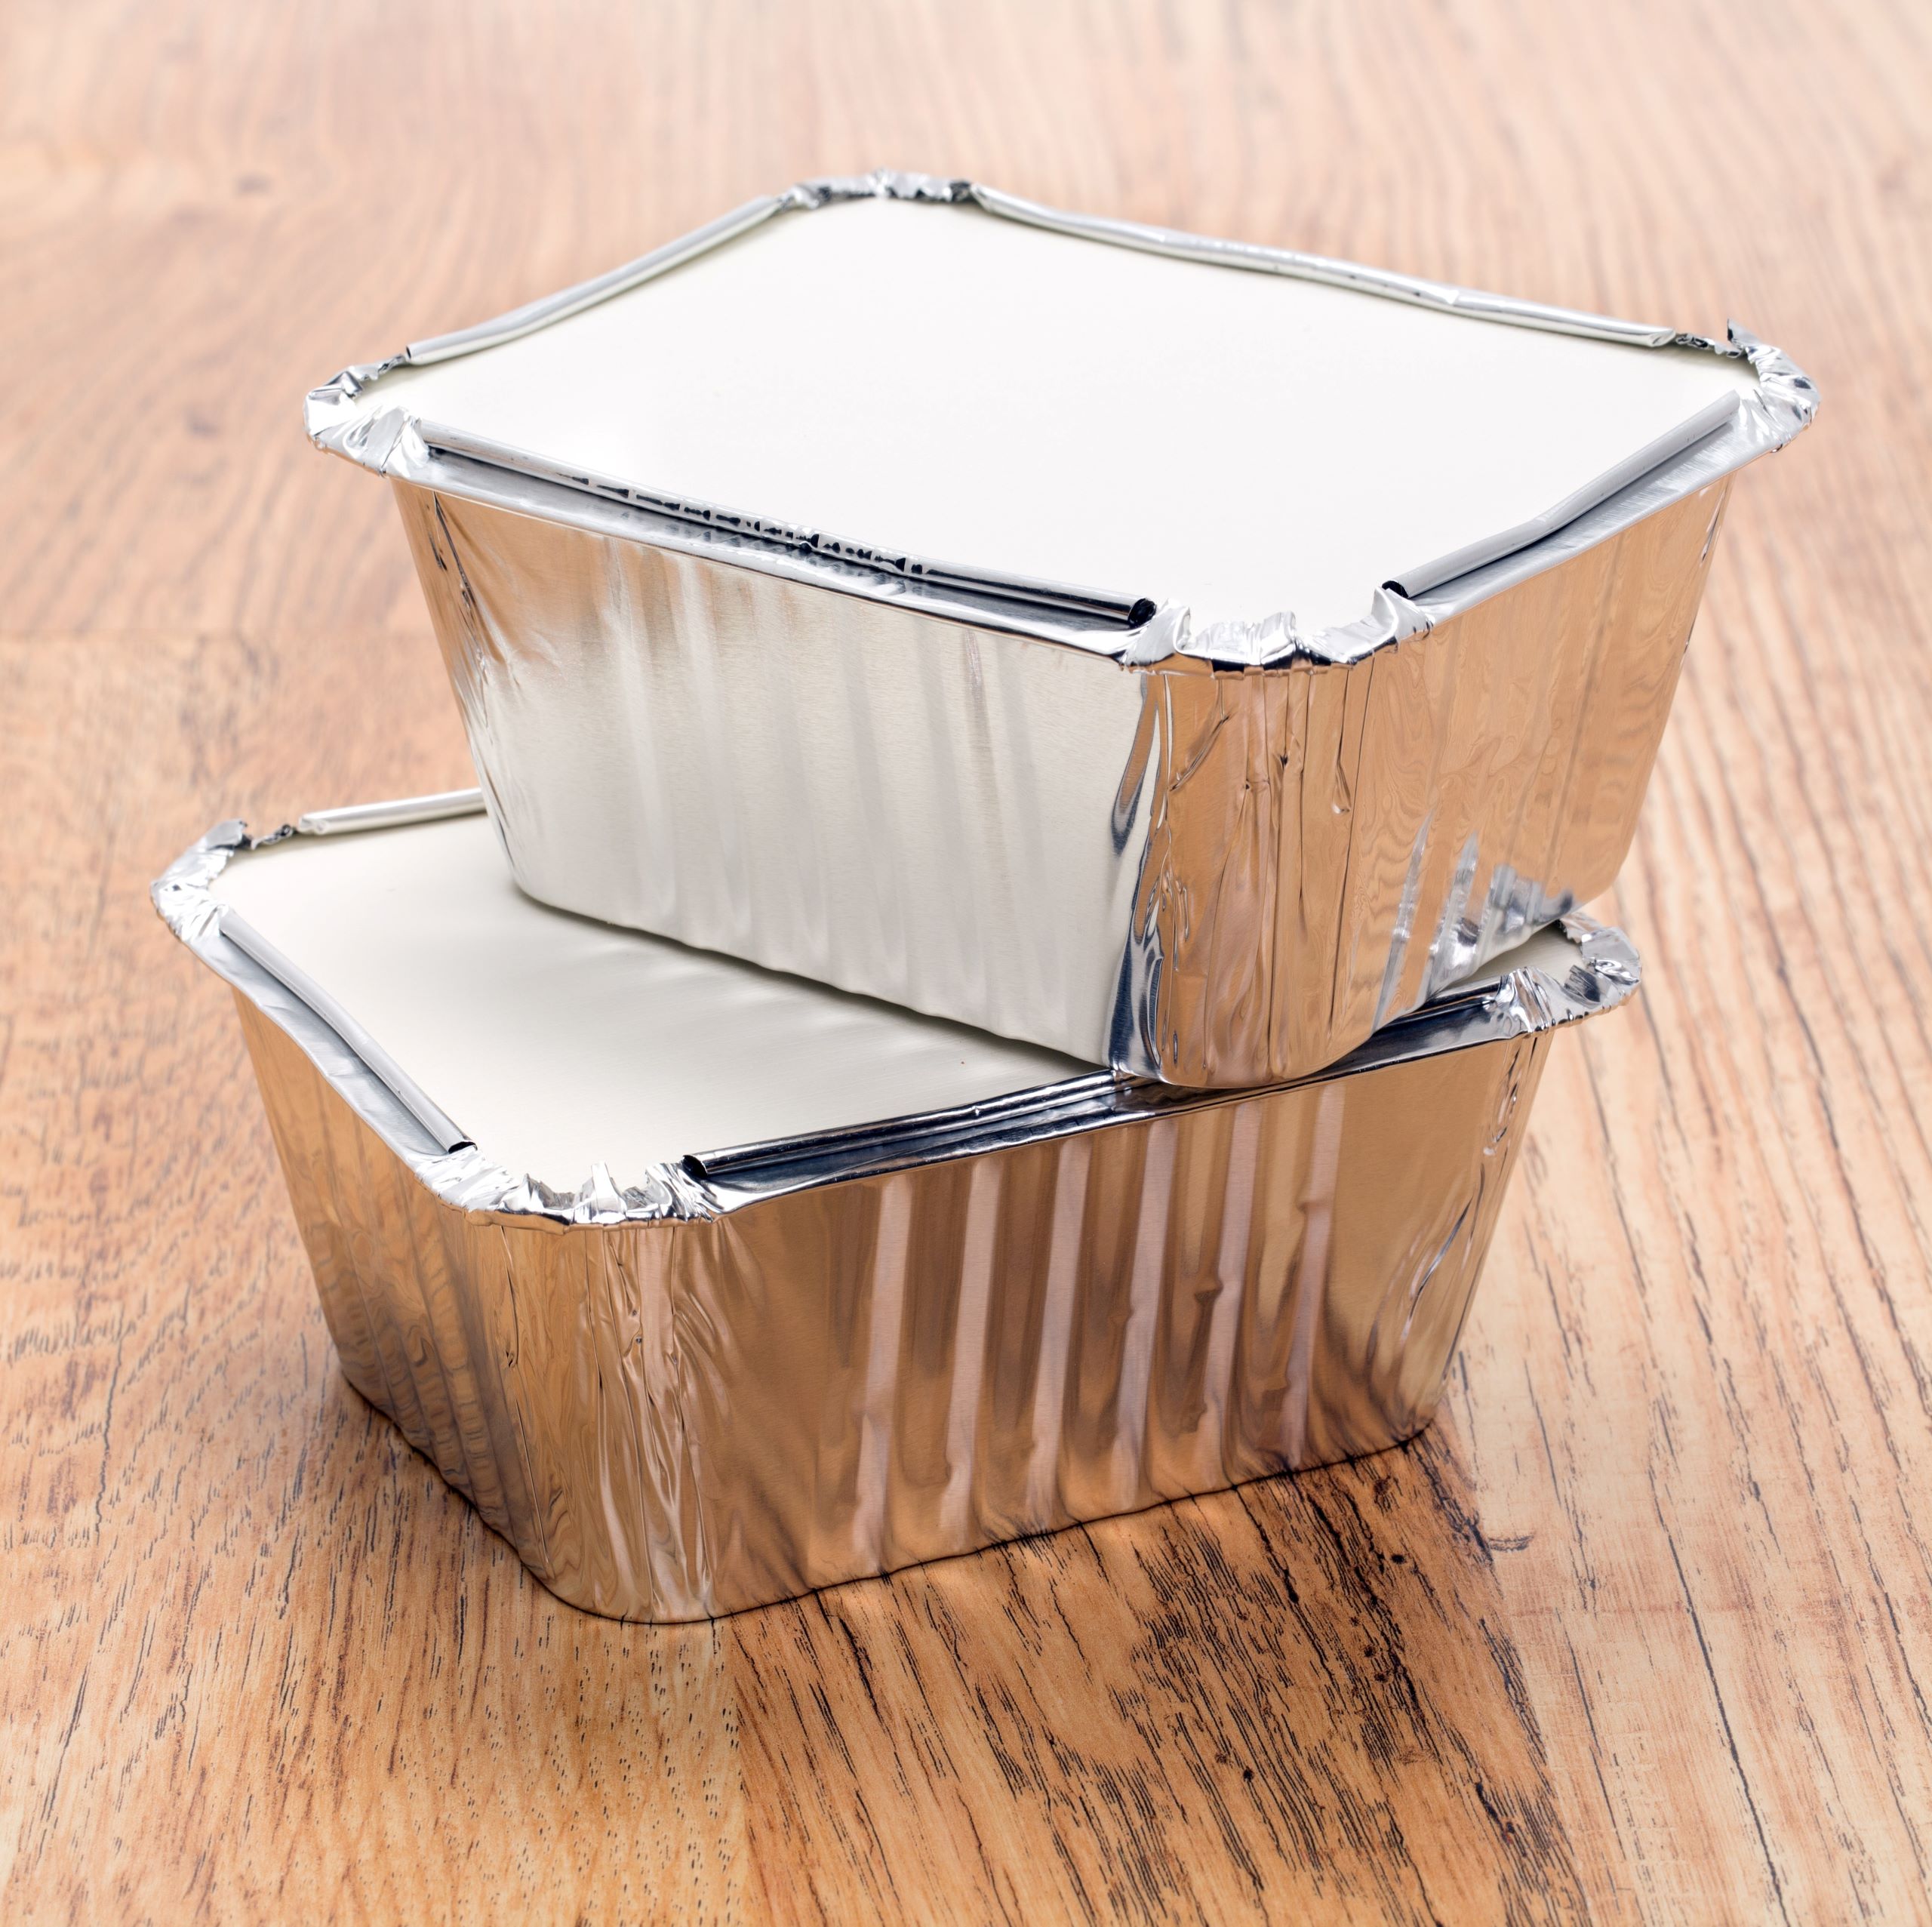 Foil Containers 2